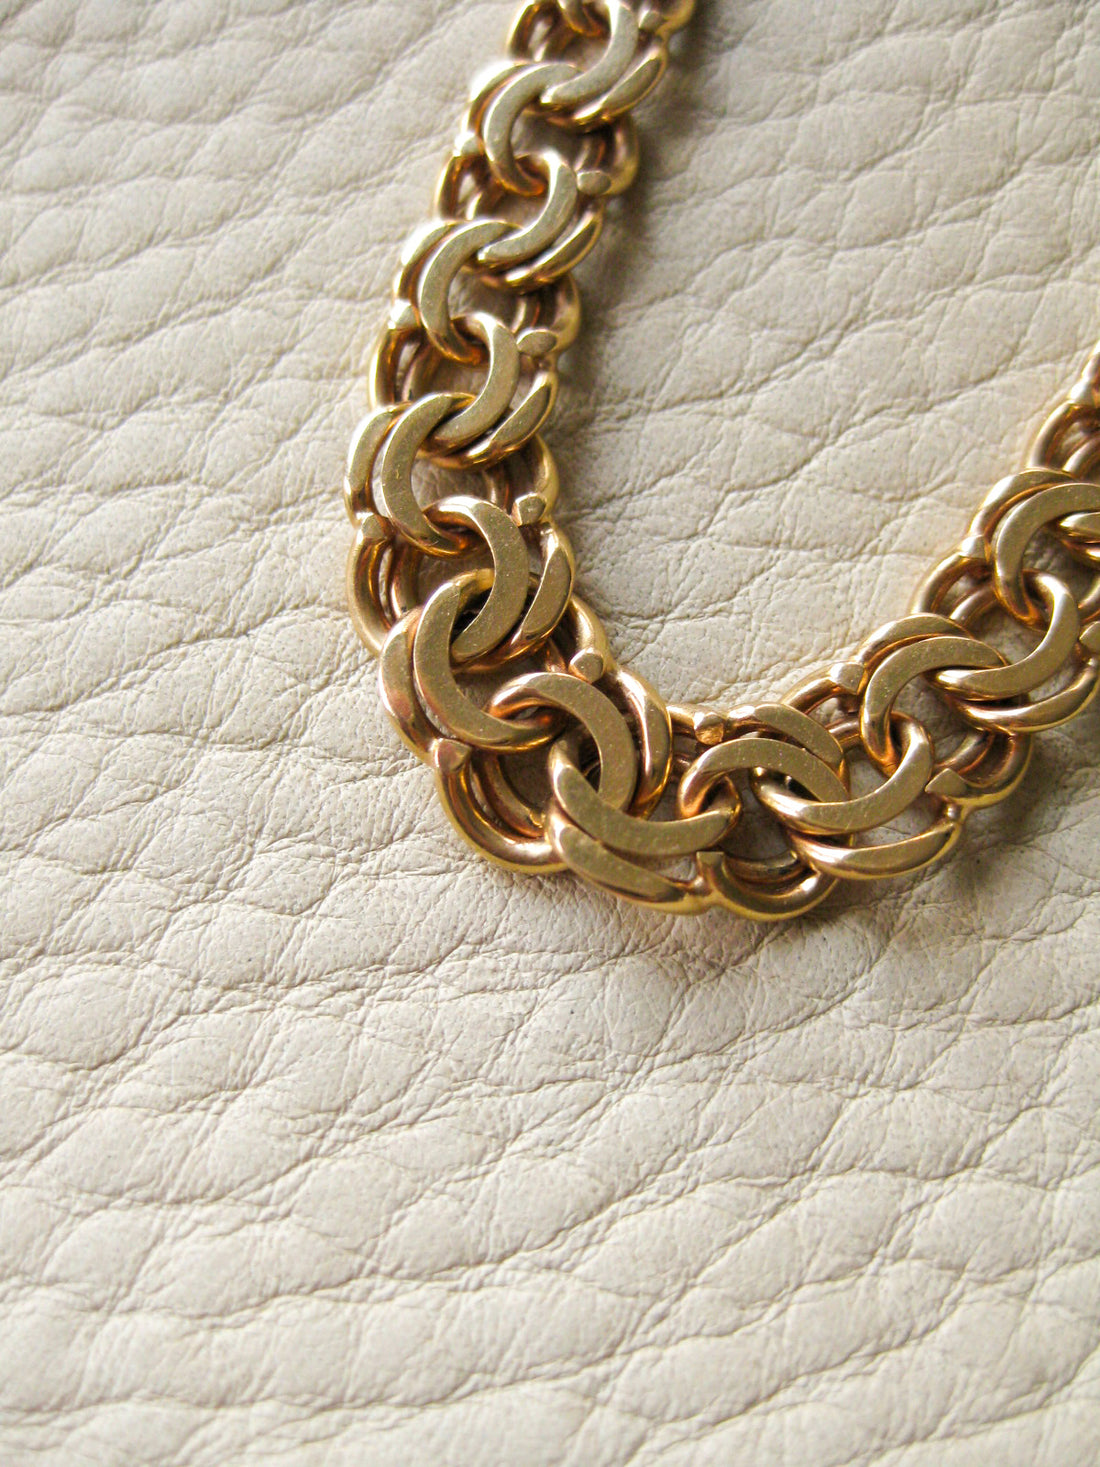 21.3g Gold necklace - Graduated double link solid 18k gold - Swedish vintage 1960s